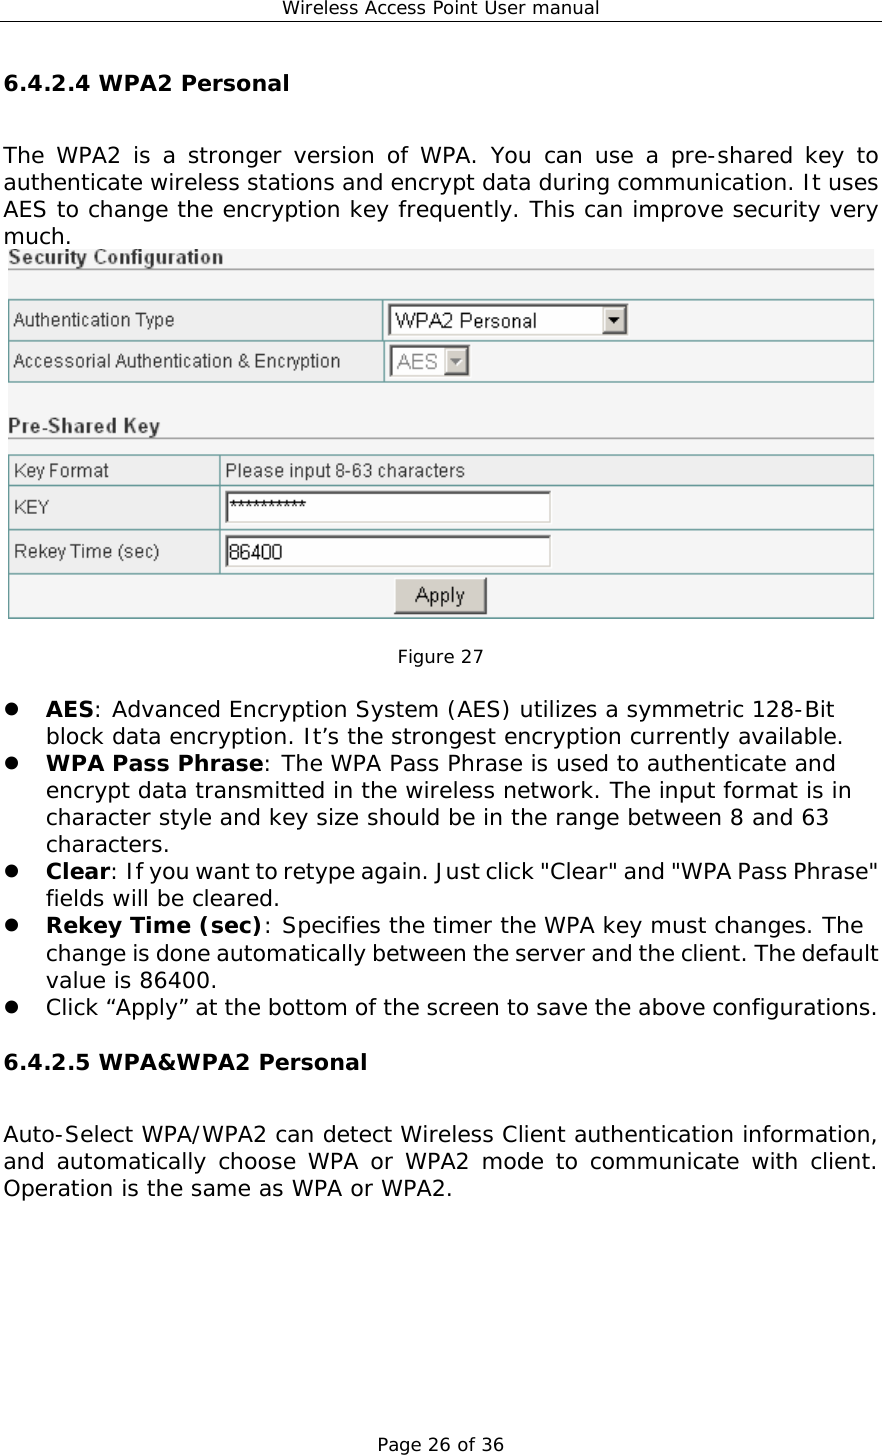 Wireless Access Point User manual Page 26 of 36 6.4.2.4 WPA2 Personal The WPA2 is a stronger version of WPA. You can use a pre-shared key to authenticate wireless stations and encrypt data during communication. It uses AES to change the encryption key frequently. This can improve security very much.   Figure 27  z AES: Advanced Encryption System (AES) utilizes a symmetric 128-Bit block data encryption. It’s the strongest encryption currently available. z WPA Pass Phrase: The WPA Pass Phrase is used to authenticate and encrypt data transmitted in the wireless network. The input format is in character style and key size should be in the range between 8 and 63 characters. z Clear: If you want to retype again. Just click &quot;Clear&quot; and &quot;WPA Pass Phrase&quot; fields will be cleared. z Rekey Time (sec): Specifies the timer the WPA key must changes. The change is done automatically between the server and the client. The default value is 86400. z Click “Apply” at the bottom of the screen to save the above configurations. 6.4.2.5 WPA&amp;WPA2 Personal Auto-Select WPA/WPA2 can detect Wireless Client authentication information, and automatically choose WPA or WPA2 mode to communicate with client. Operation is the same as WPA or WPA2. 